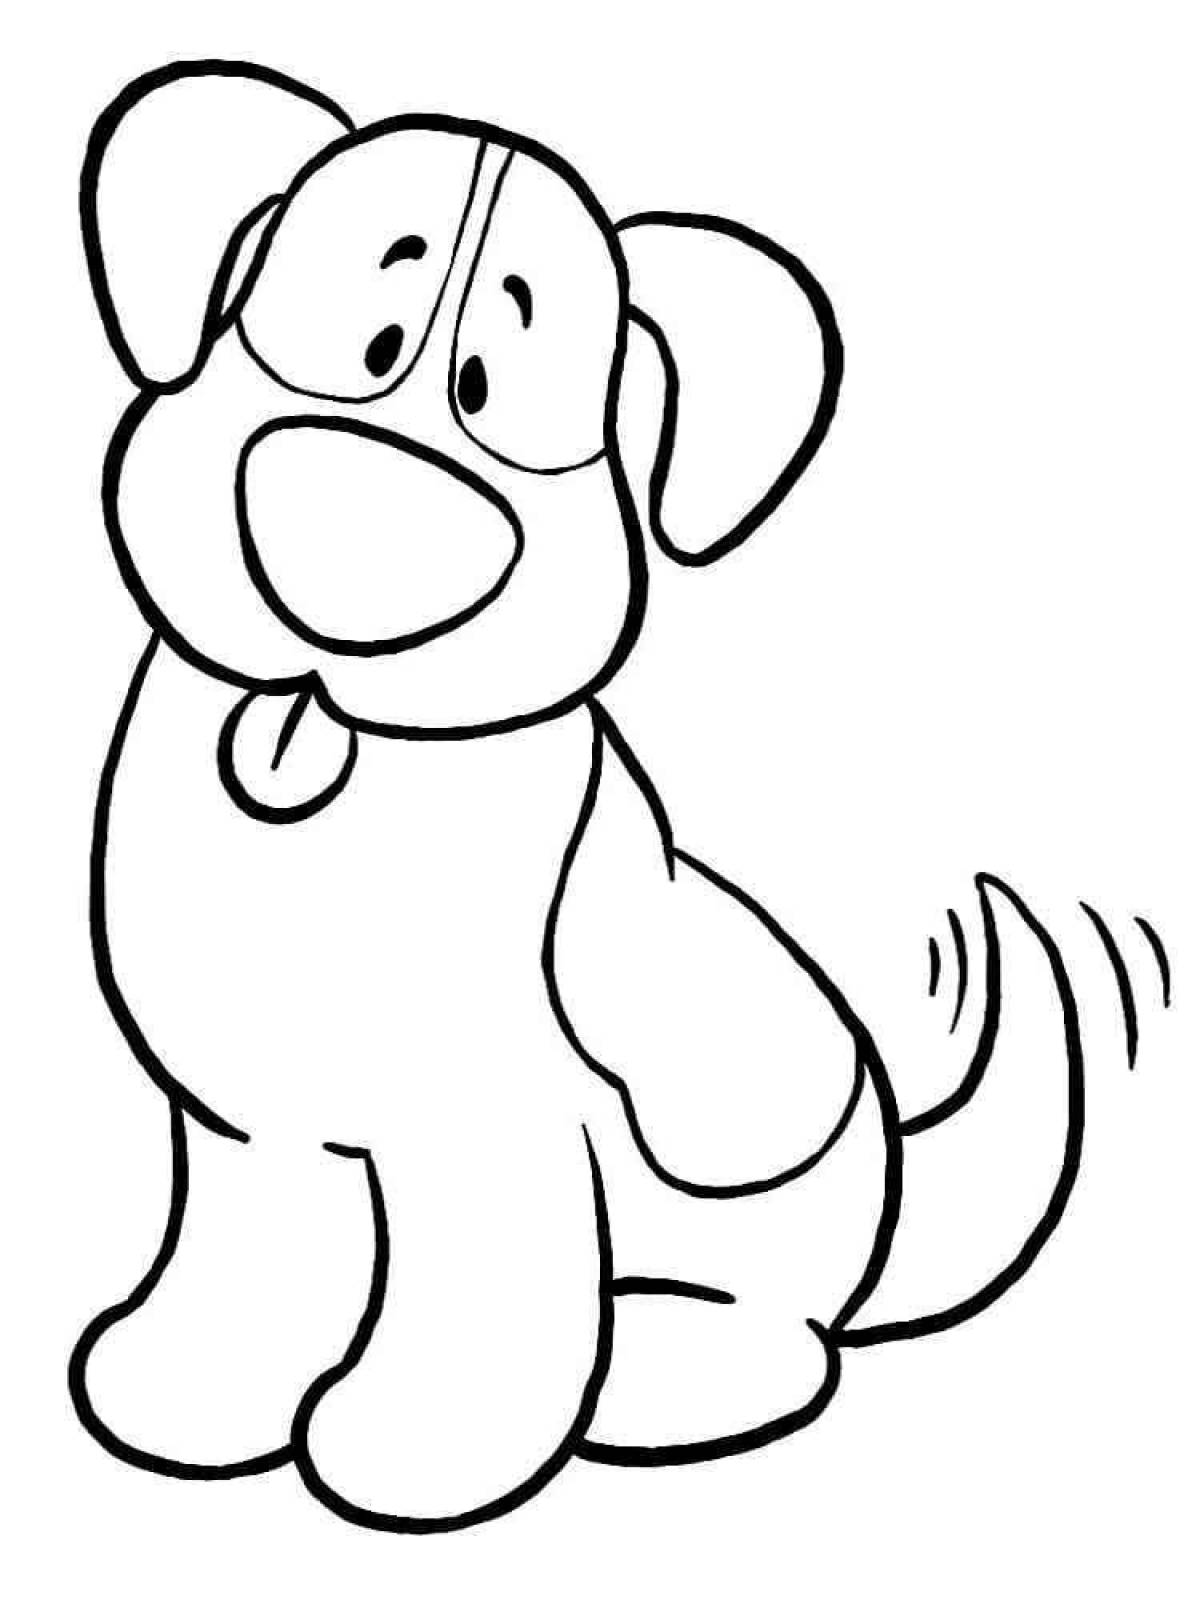 Energetic coloring dog for children